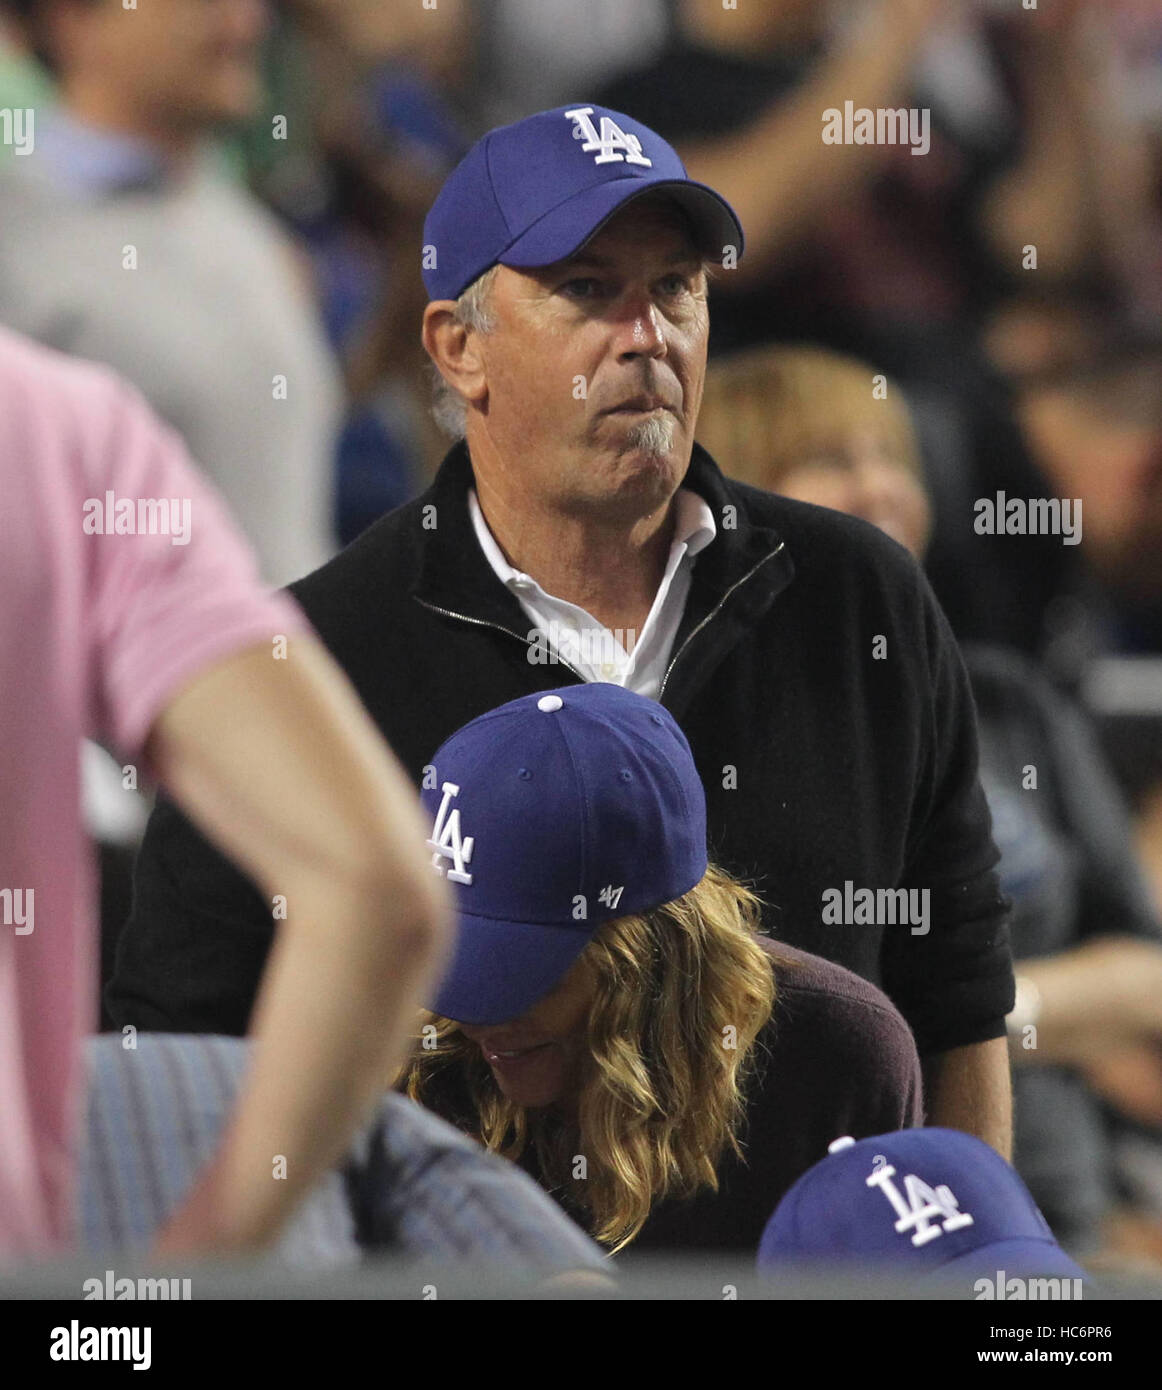 Celebrities at the Dodgers game. The Los Angeles Dodgers defeated